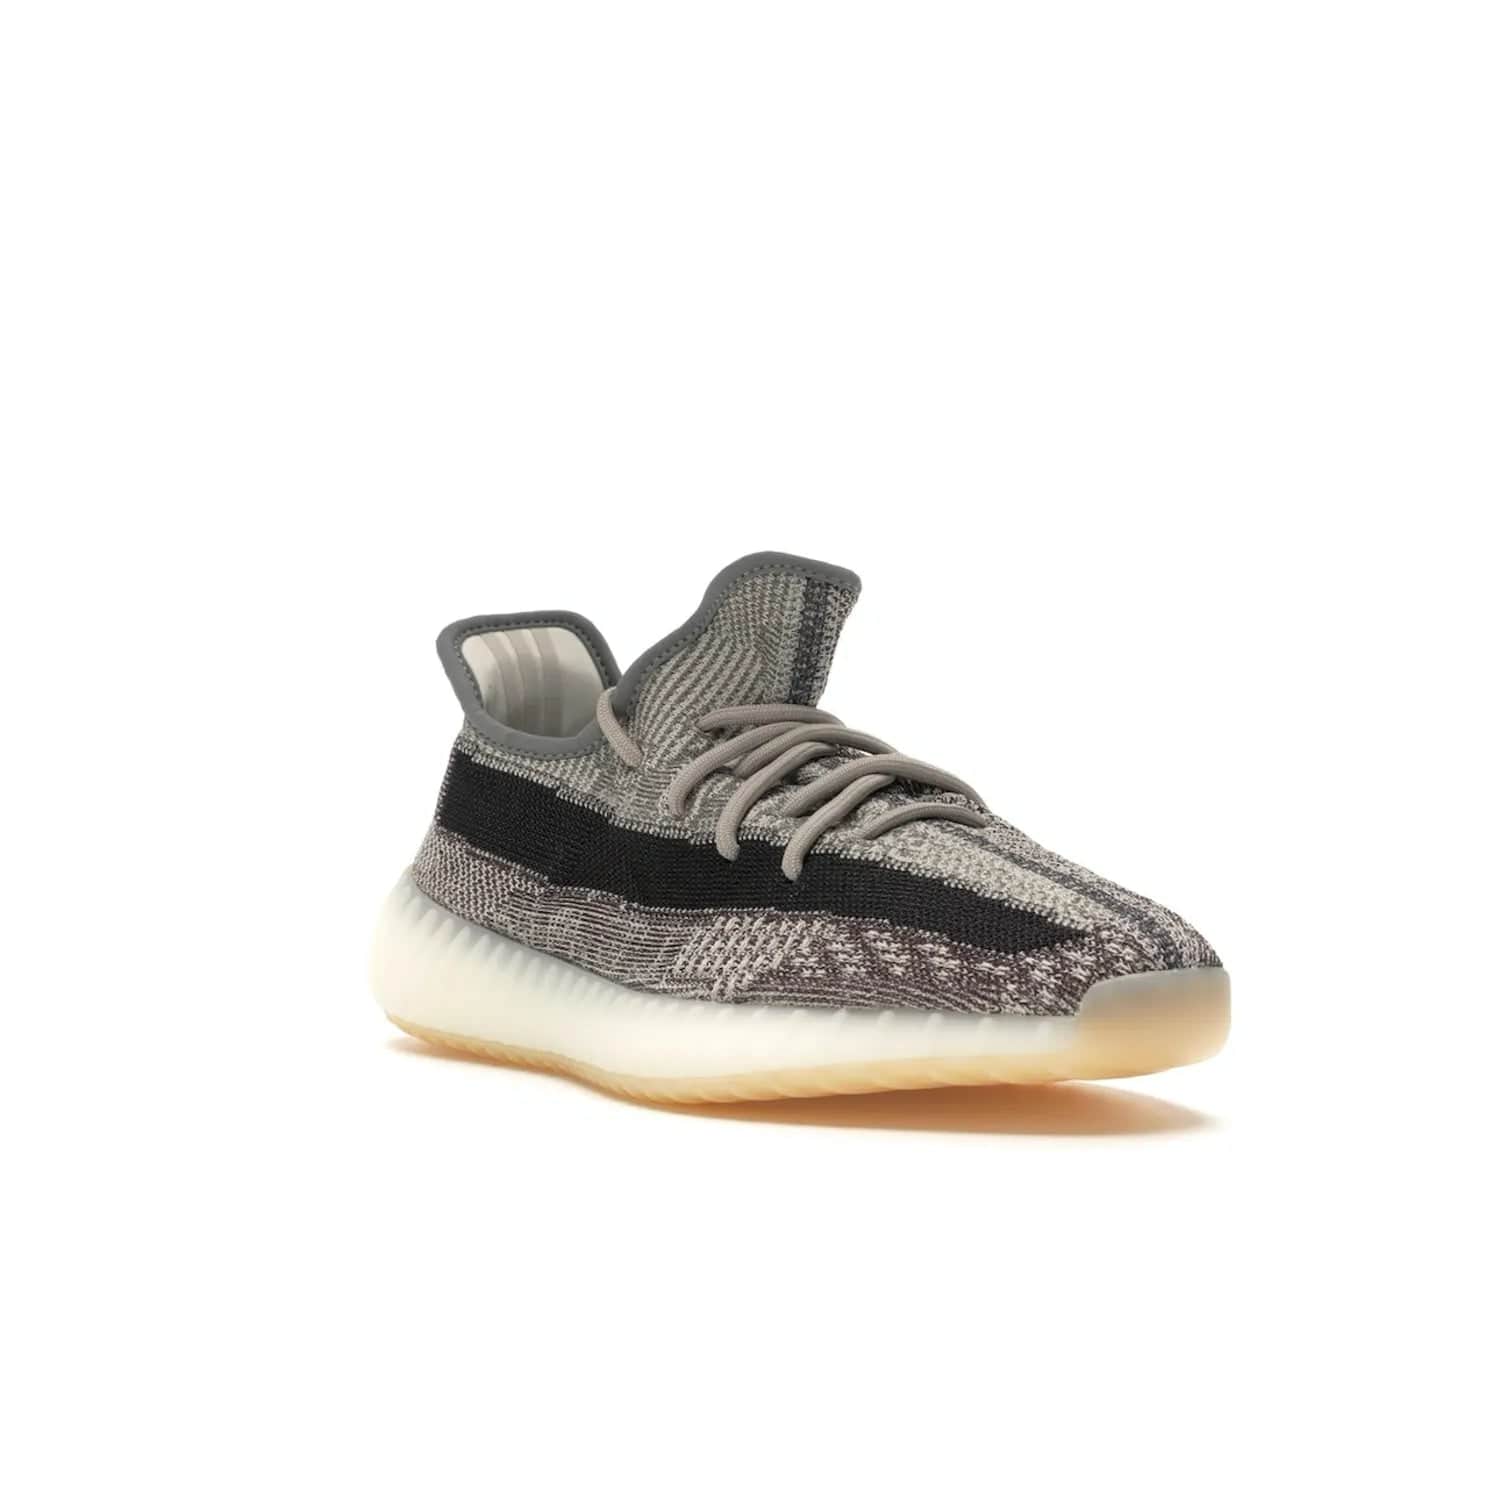 adidas Yeezy Boost 350 V2 Zyon - Image 6 - Only at www.BallersClubKickz.com - Step up your style game with the adidas Yeezy Boost 350 V2 Zyon. This sleek sneaker features a Primeknit upper, dark side stripe, translucent Boost sole, and creamy white interior providing style and comfort. Get them now!